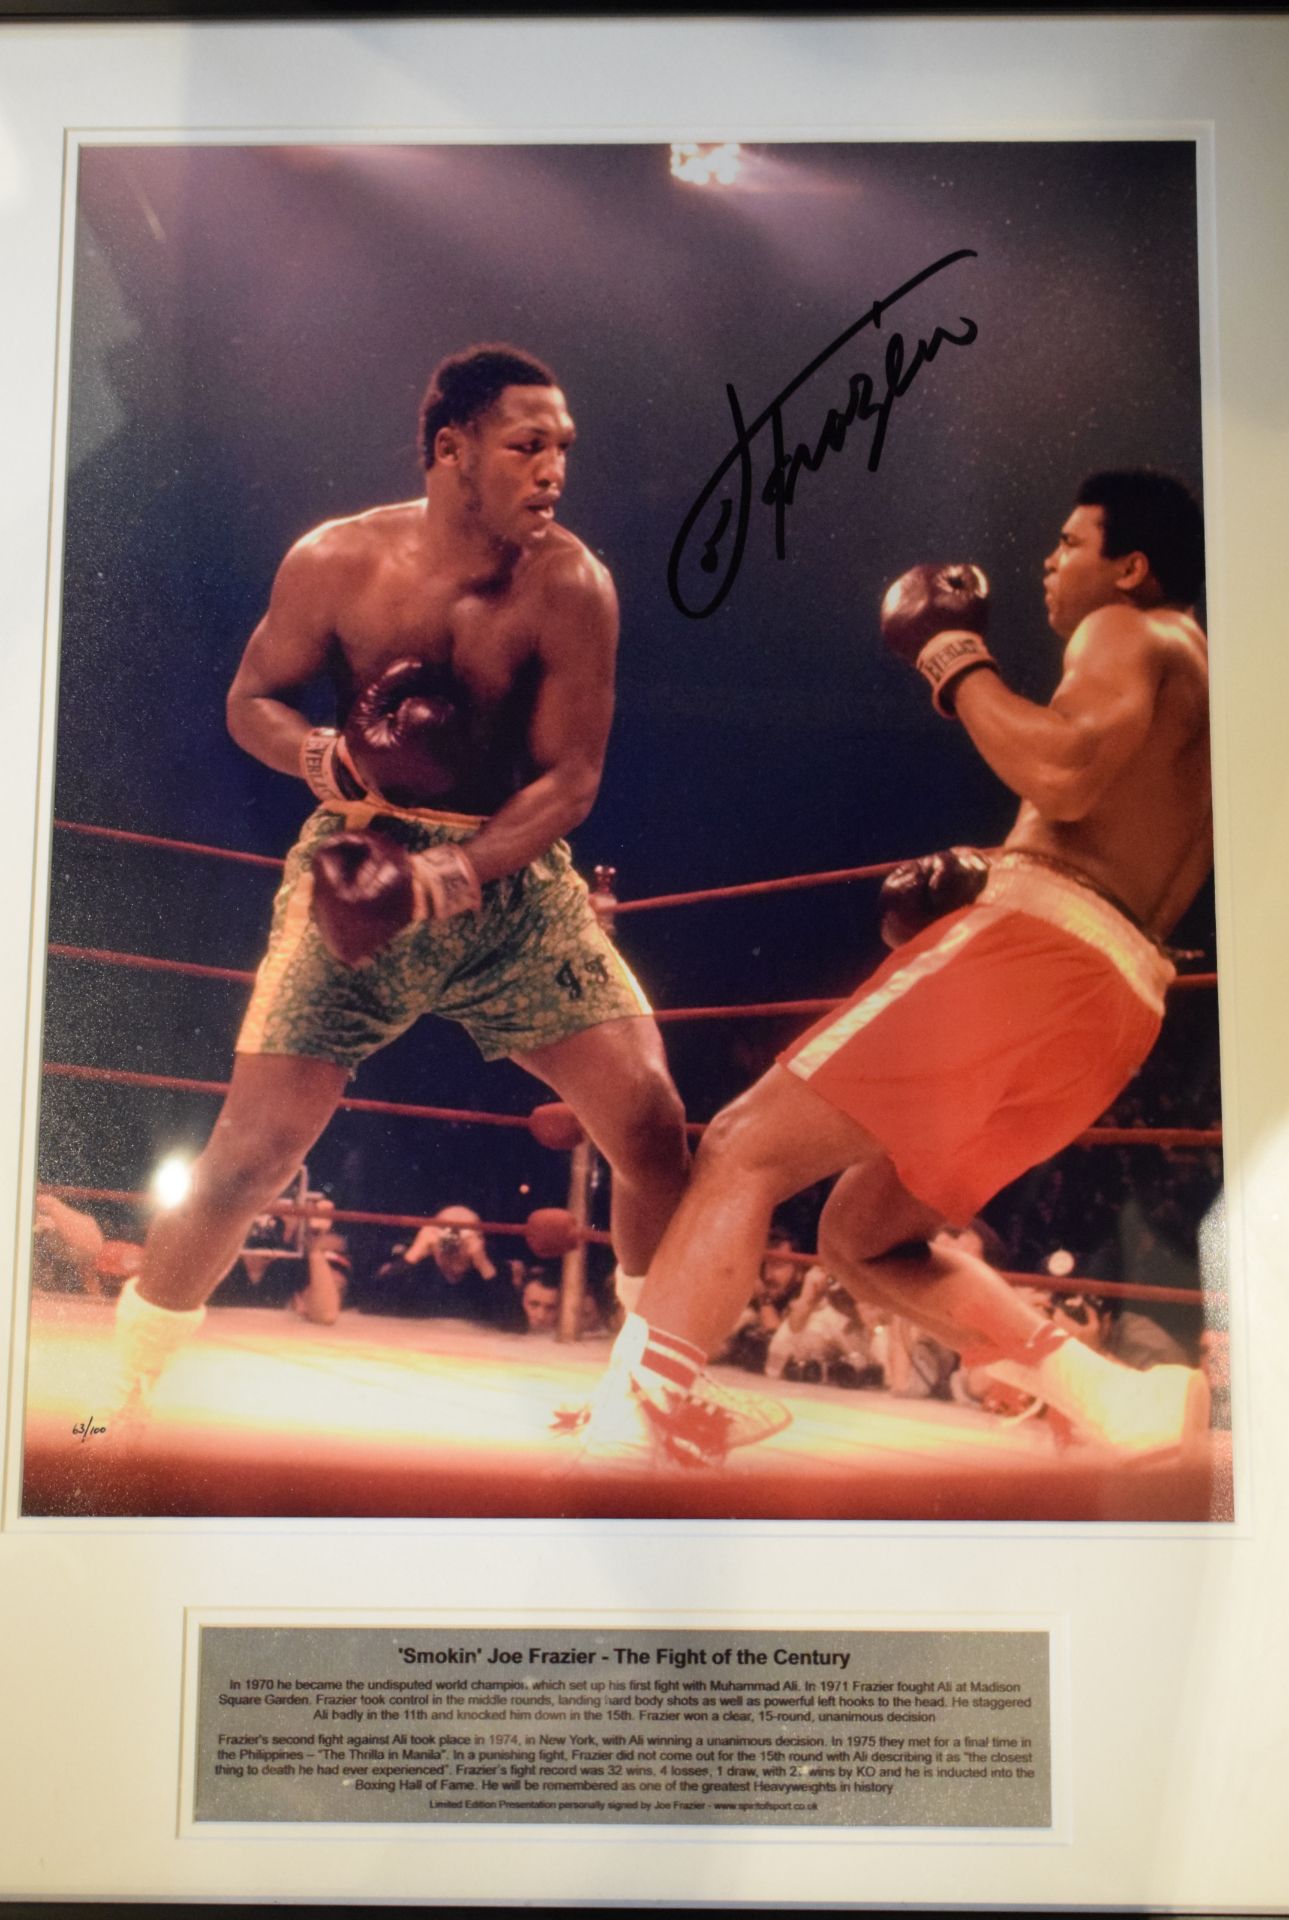 Signed Photograph of Joe Frazier knocking down Ali in 'The Fight Of The Century'